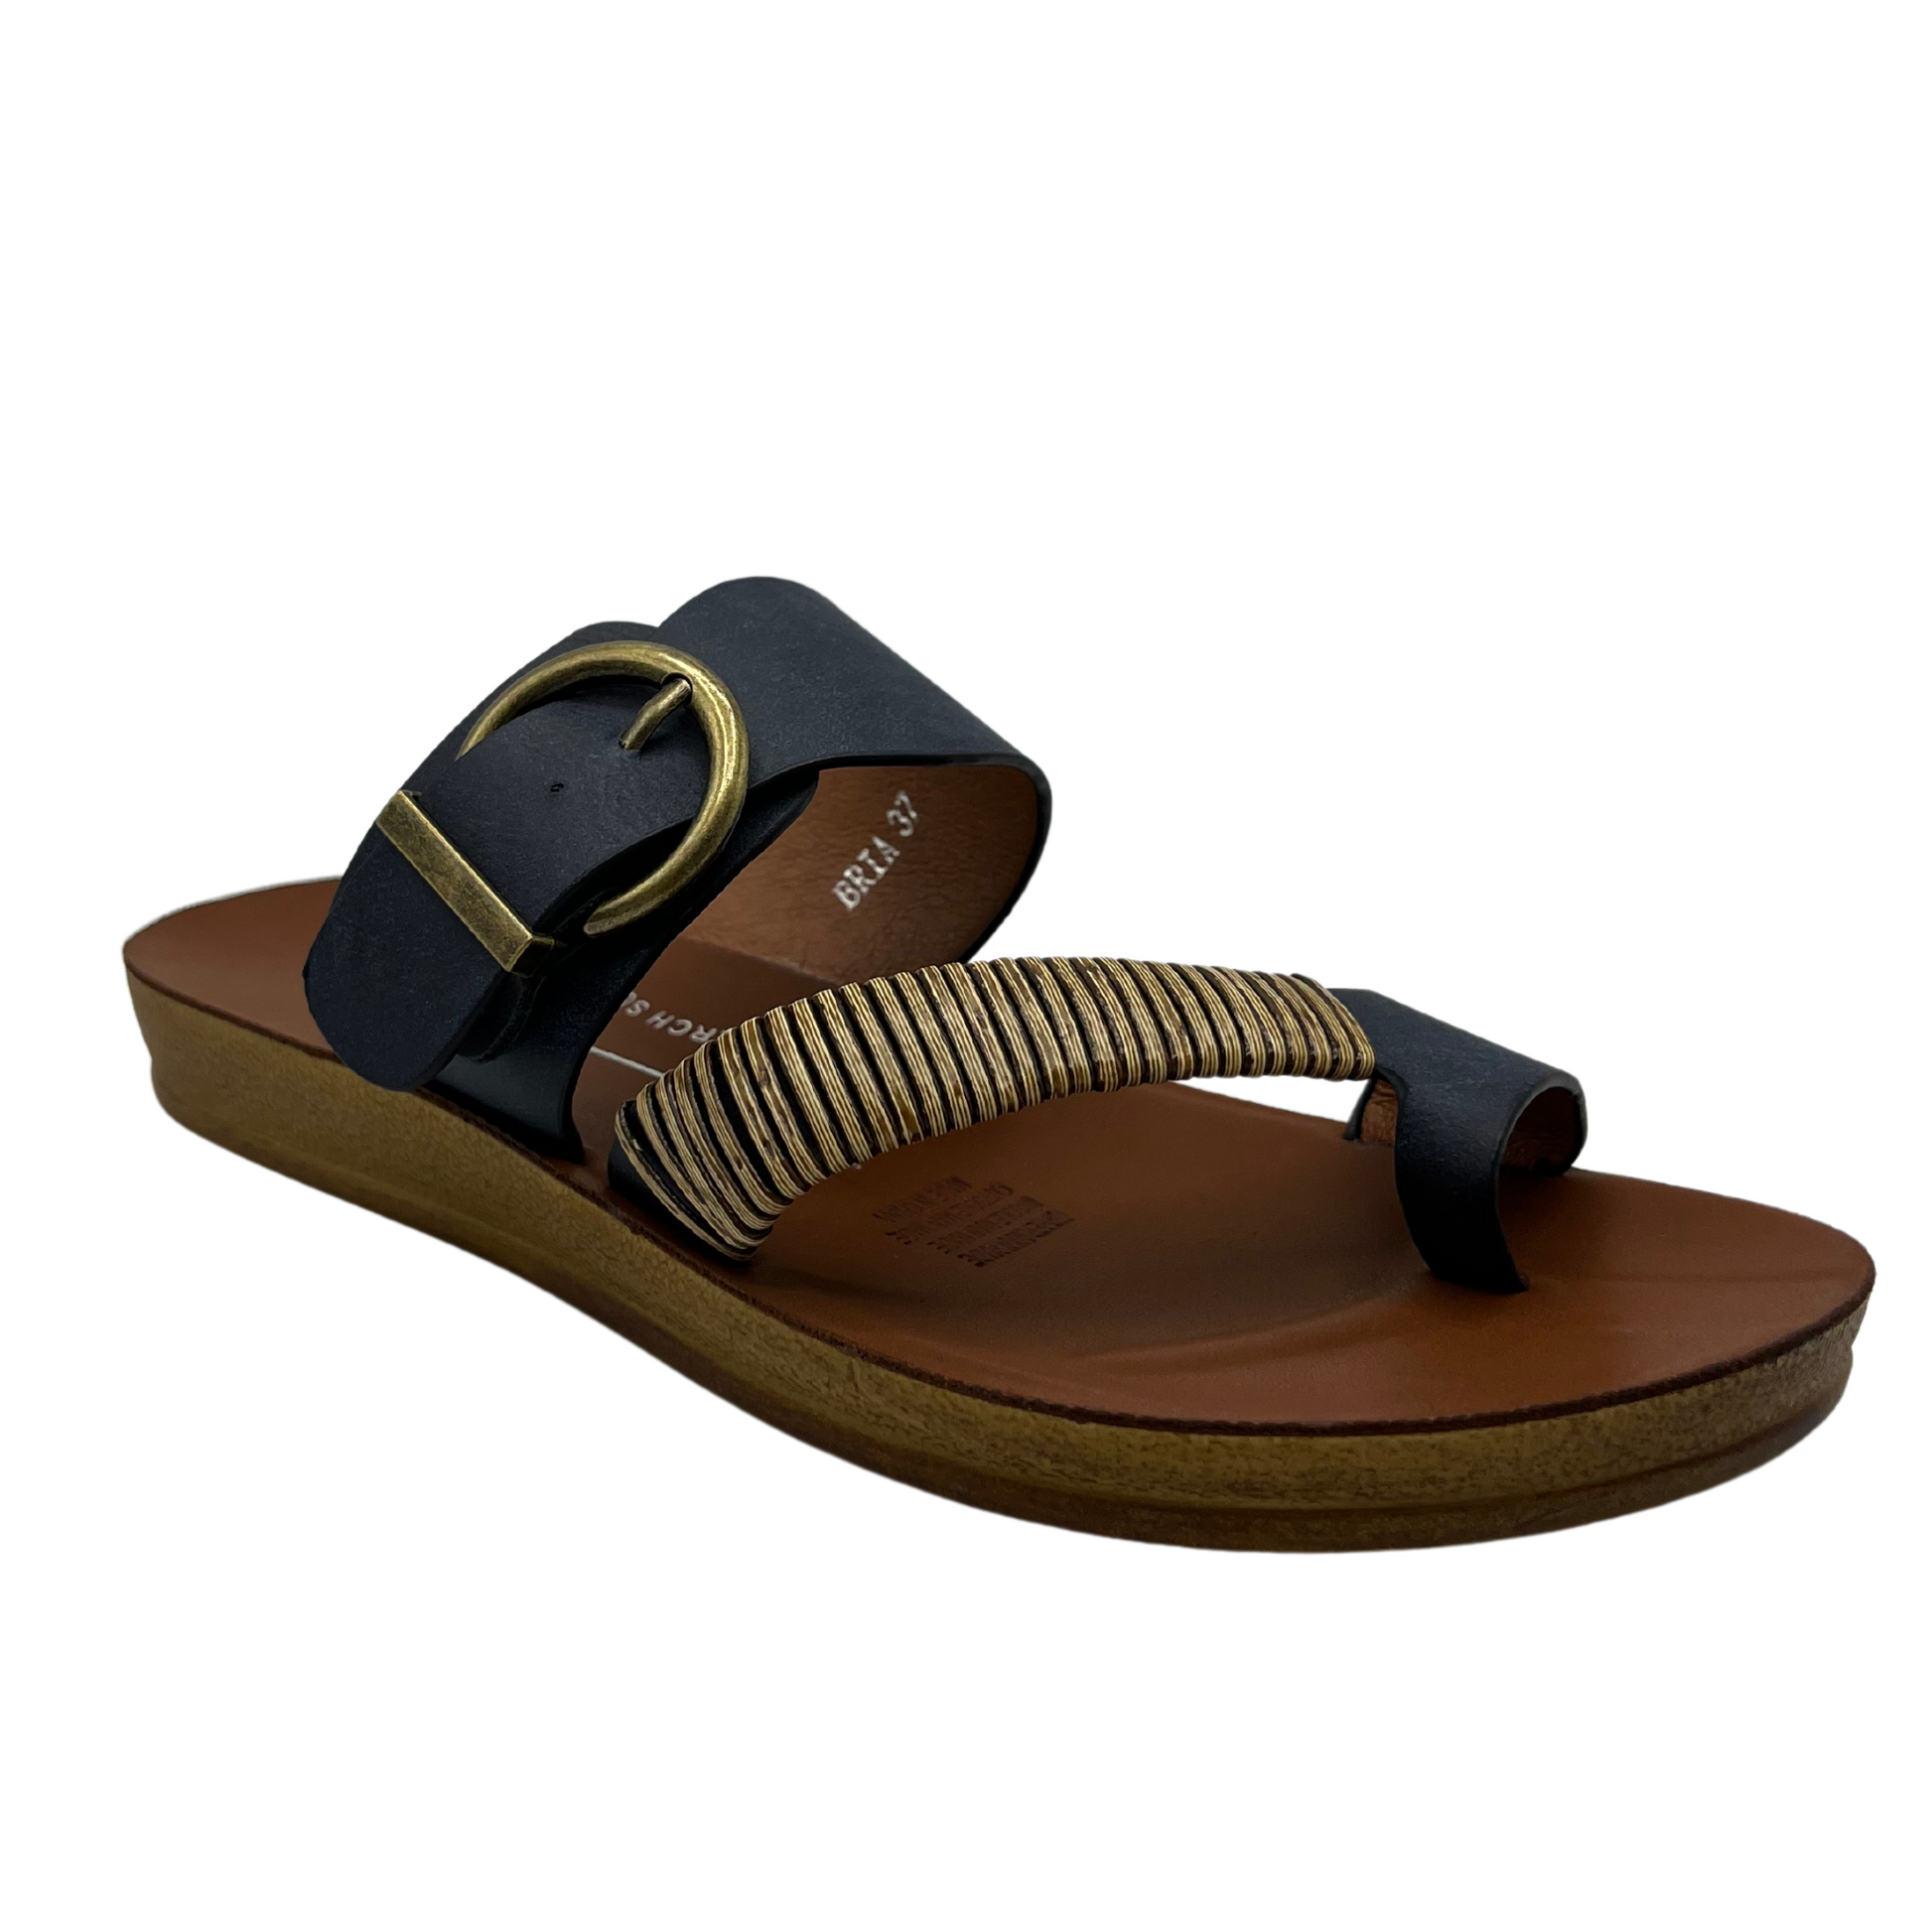 45 degree angled view of navy leather sandal with gold buckle and brown insole